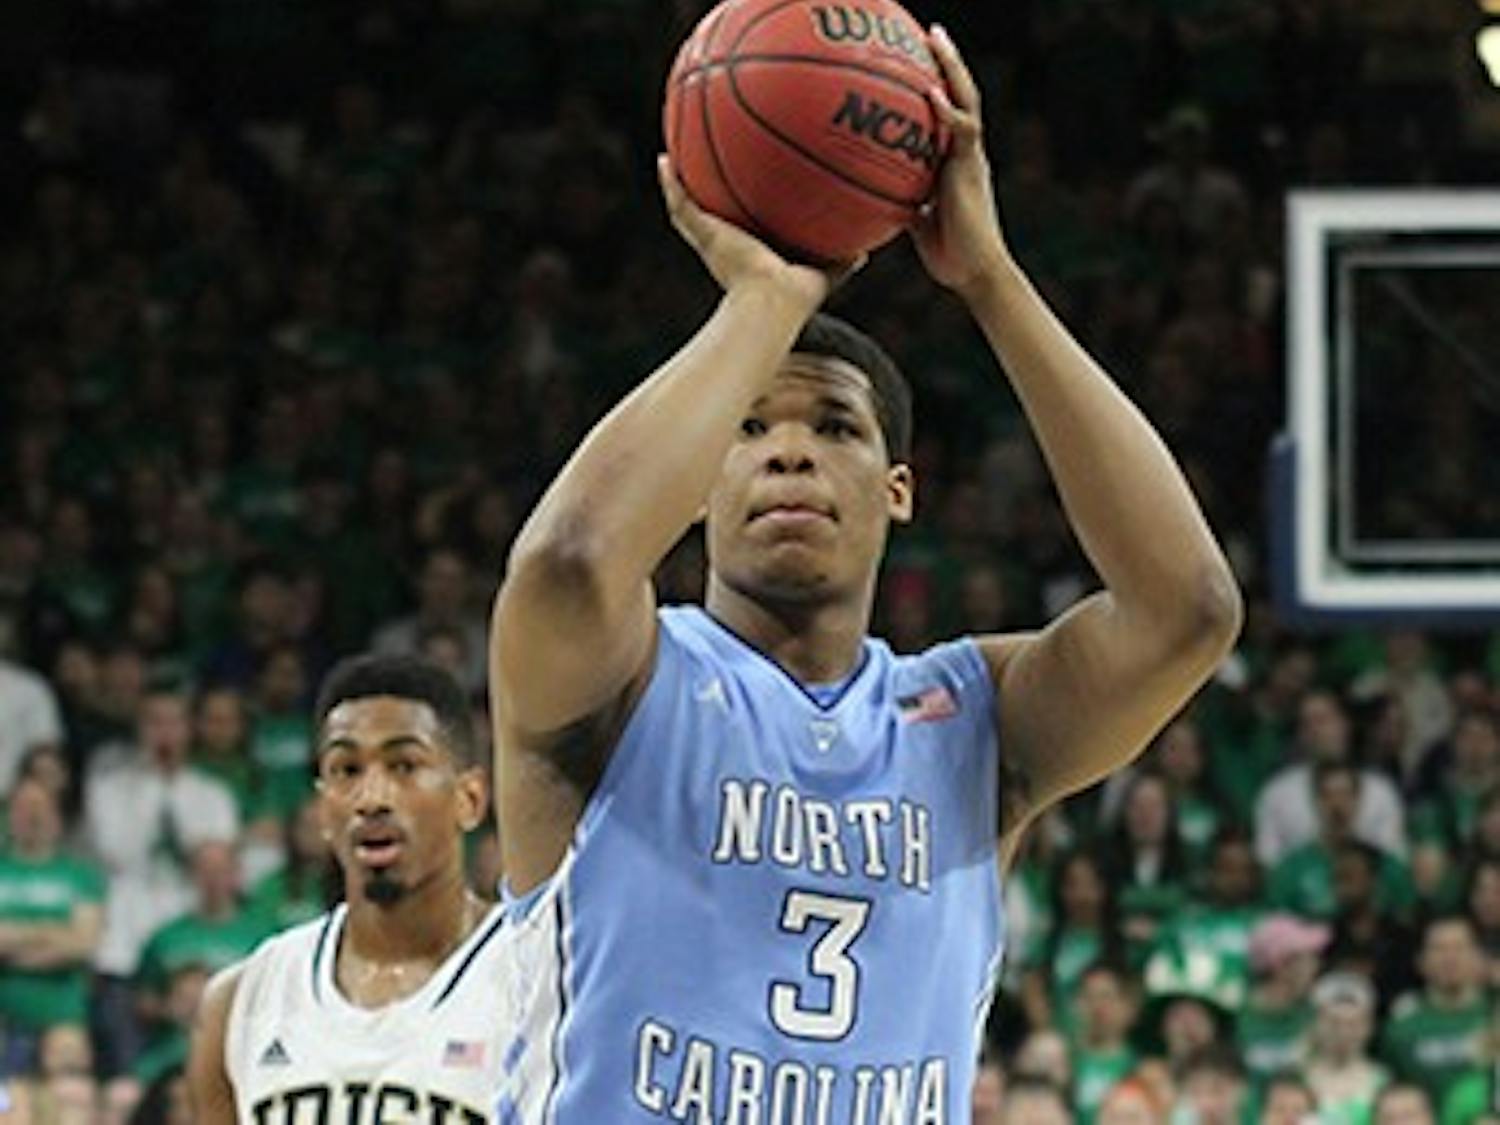 The UNC men's basketball team beat Notre Dame on Saturday, February 8. 